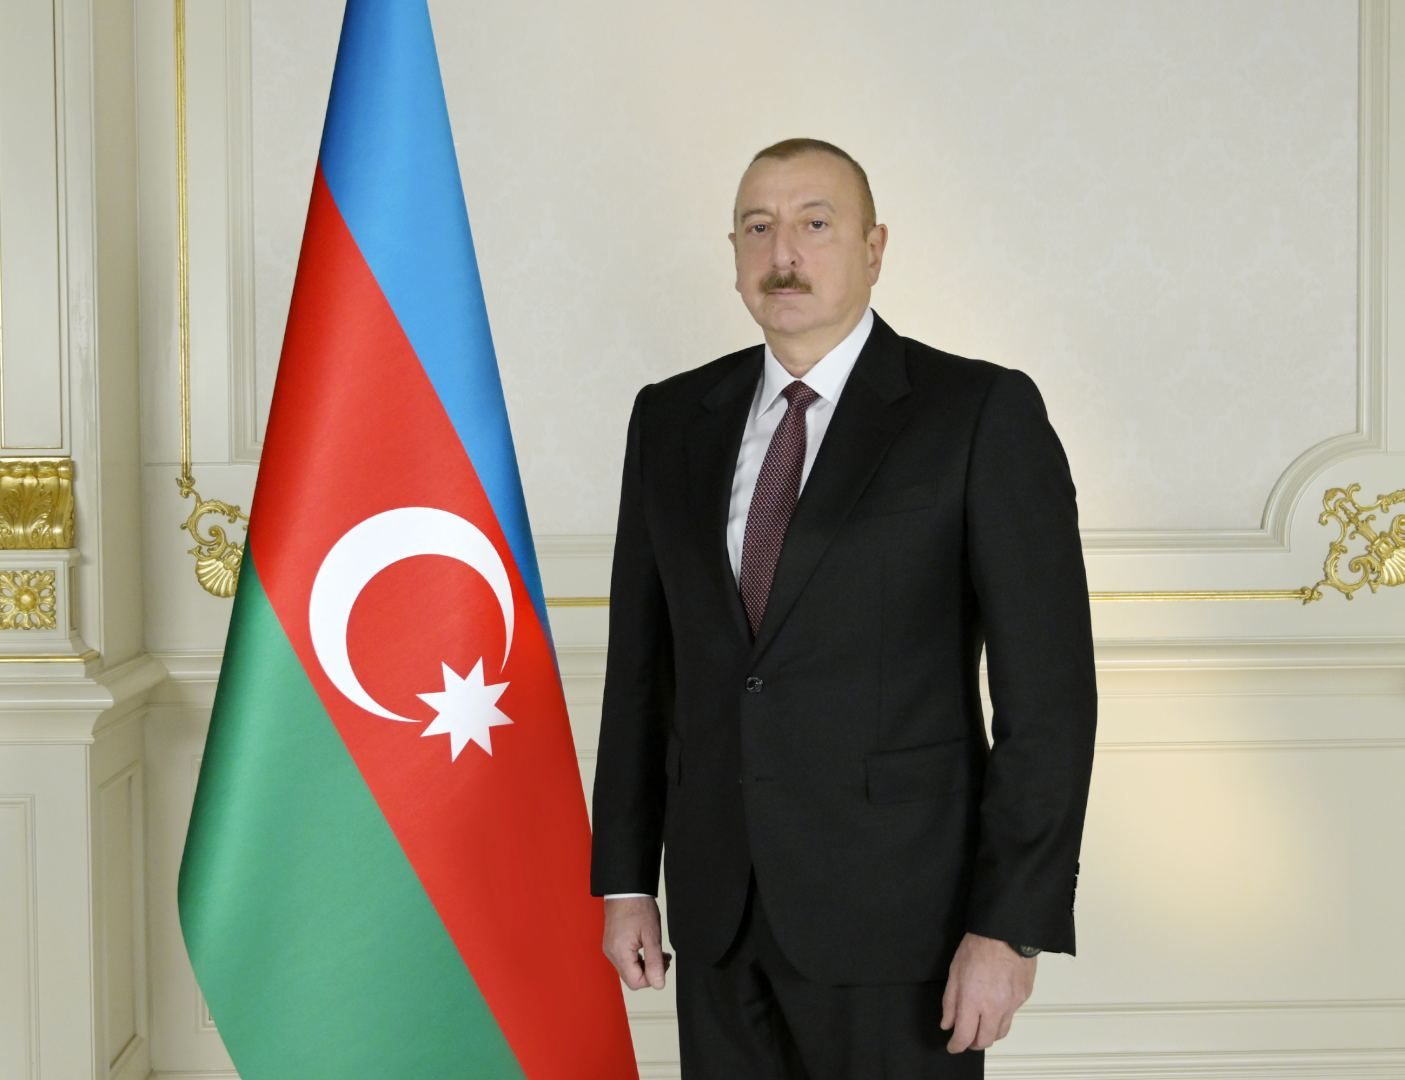 President Ilham Aliyev sends letter to King of Sweden on occasion of country's national holiday